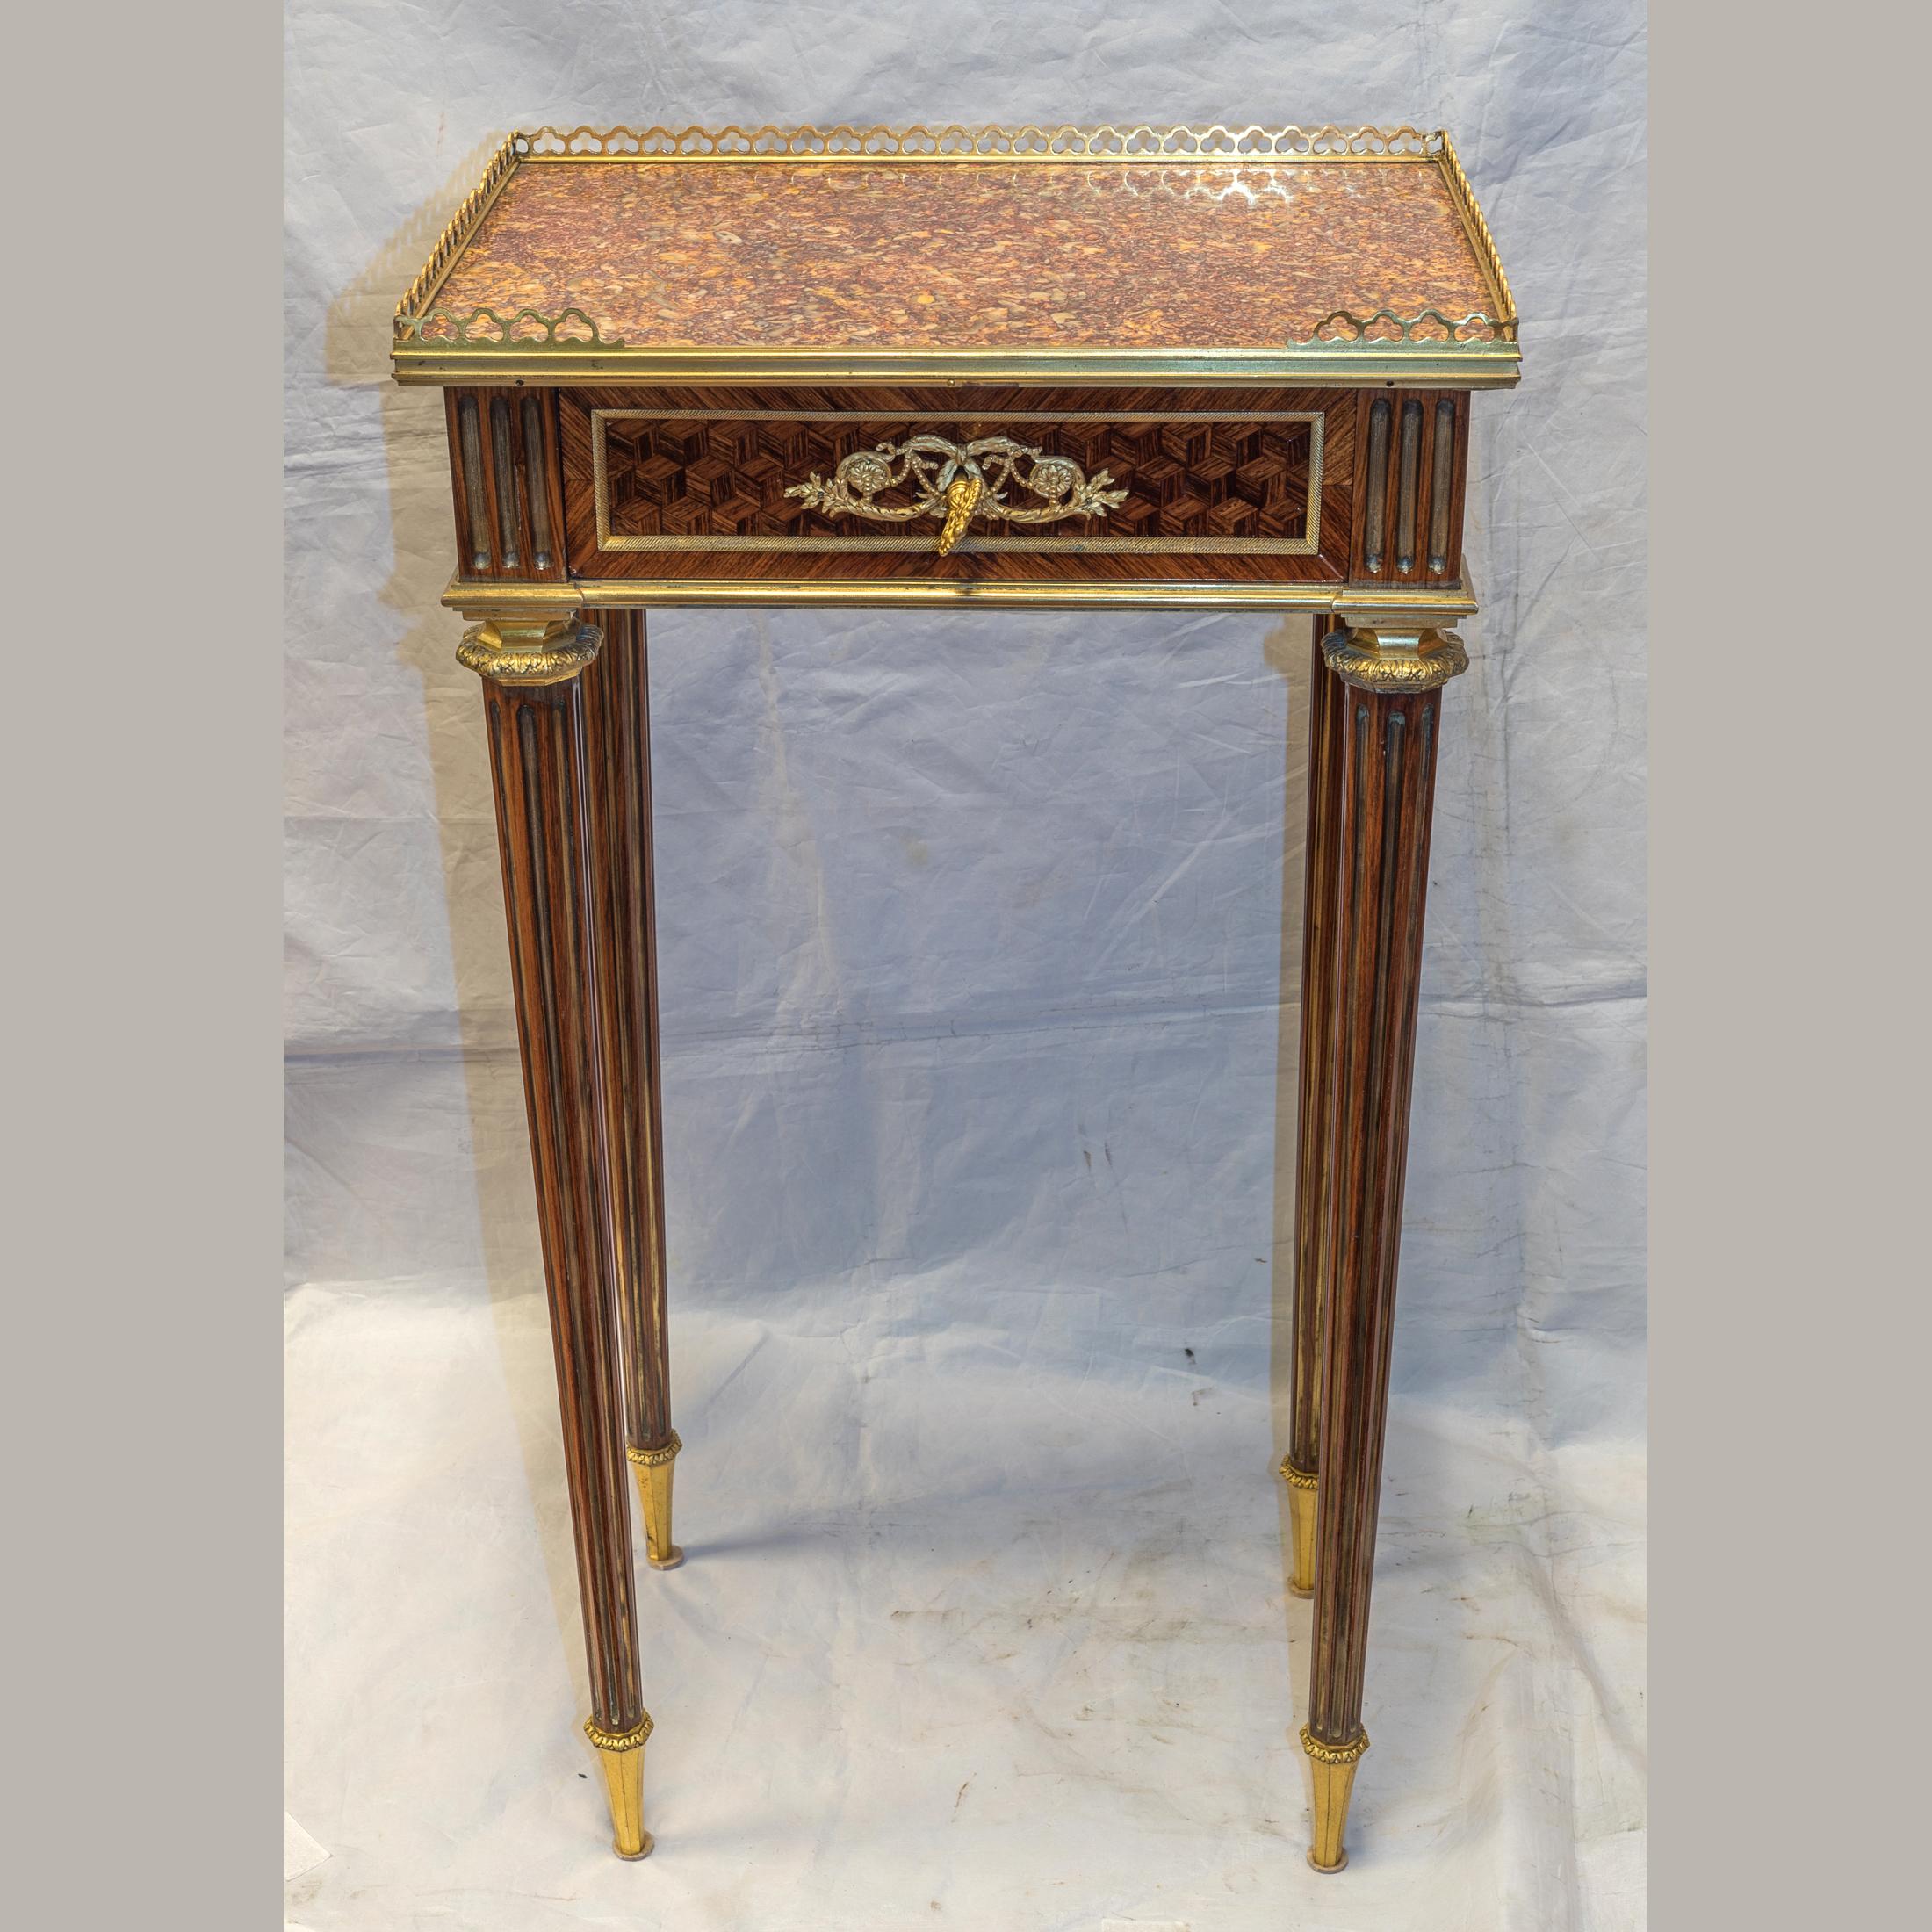 A fine quality Louis XVI-style mahogany side table. Stamped E. ZWIENER

Maker: Joseph-Emmanuel Zwiener (1848-1895)
Date: 19th century
Origin: French
Size: H 30 x W 16 1/2 x D 12 inches.